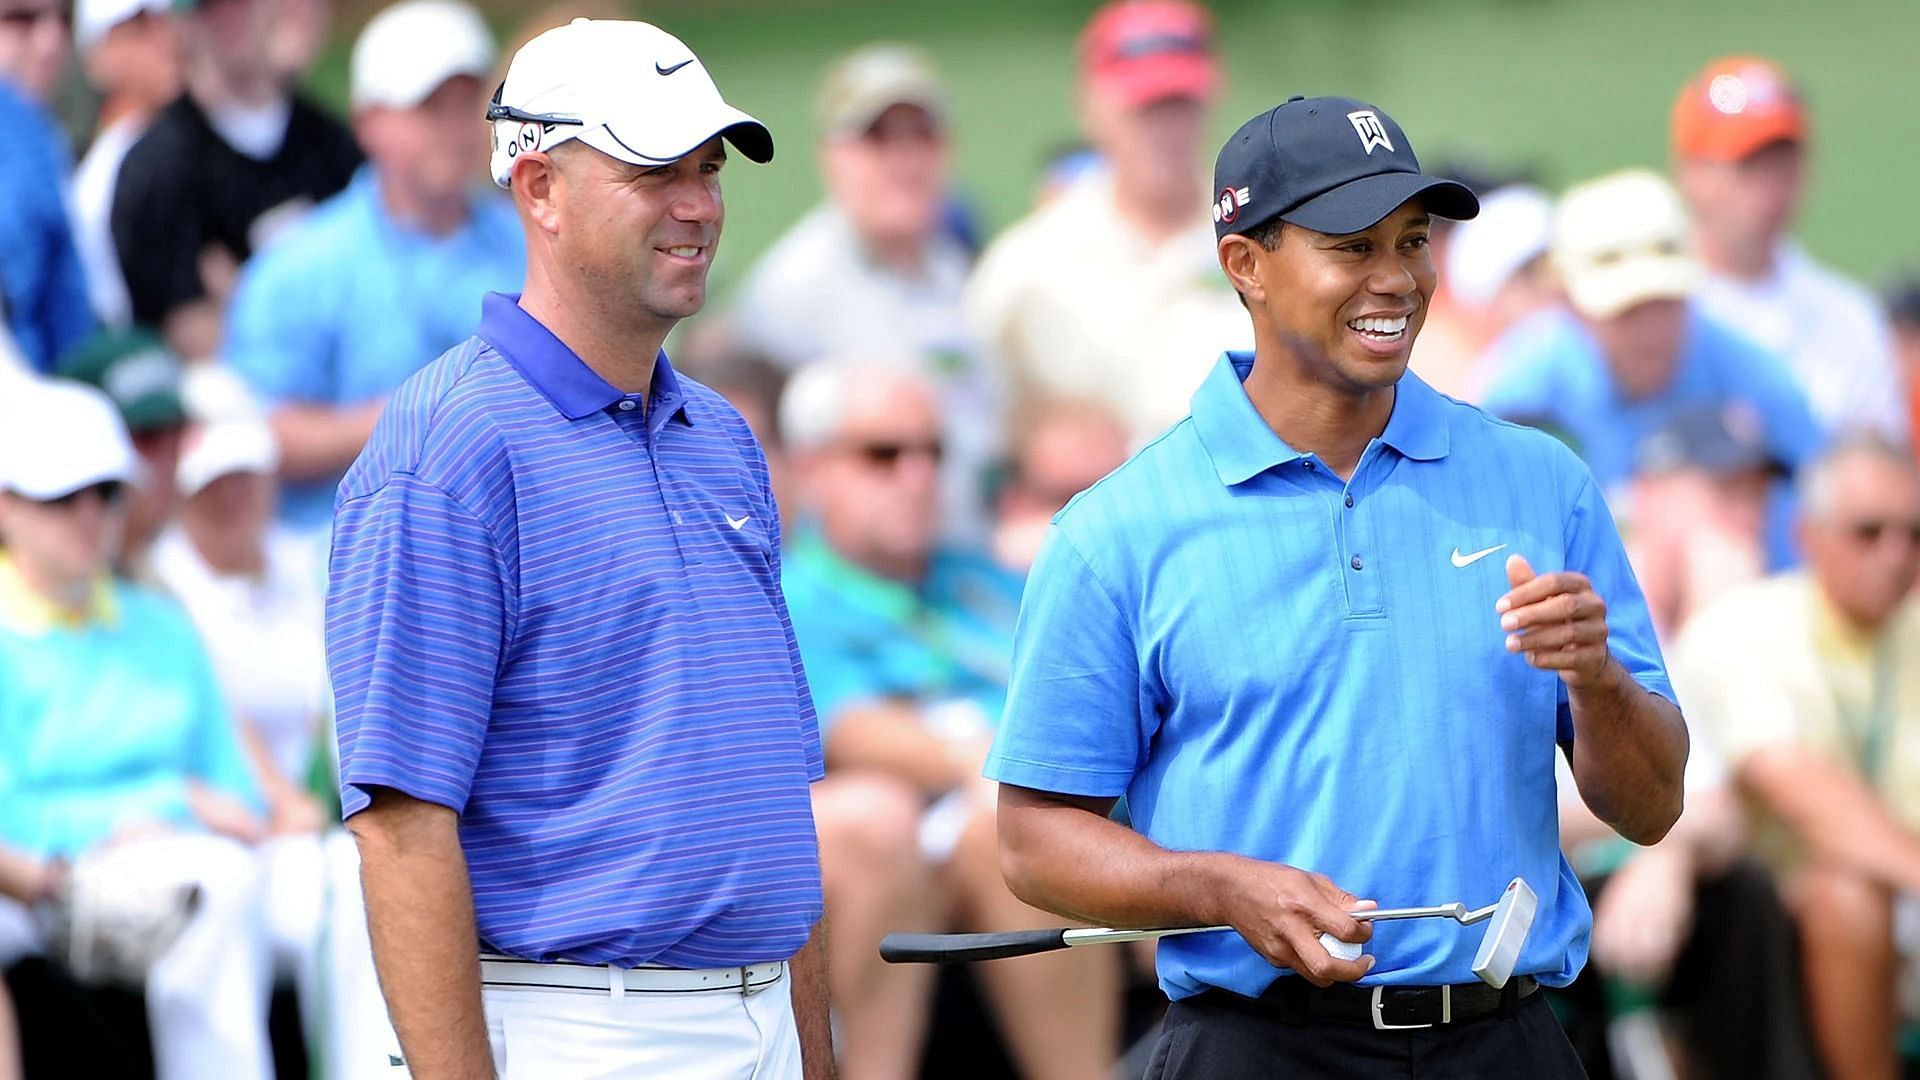 Stewart Cink lauds Tiger Woods ahead of PNC Championship